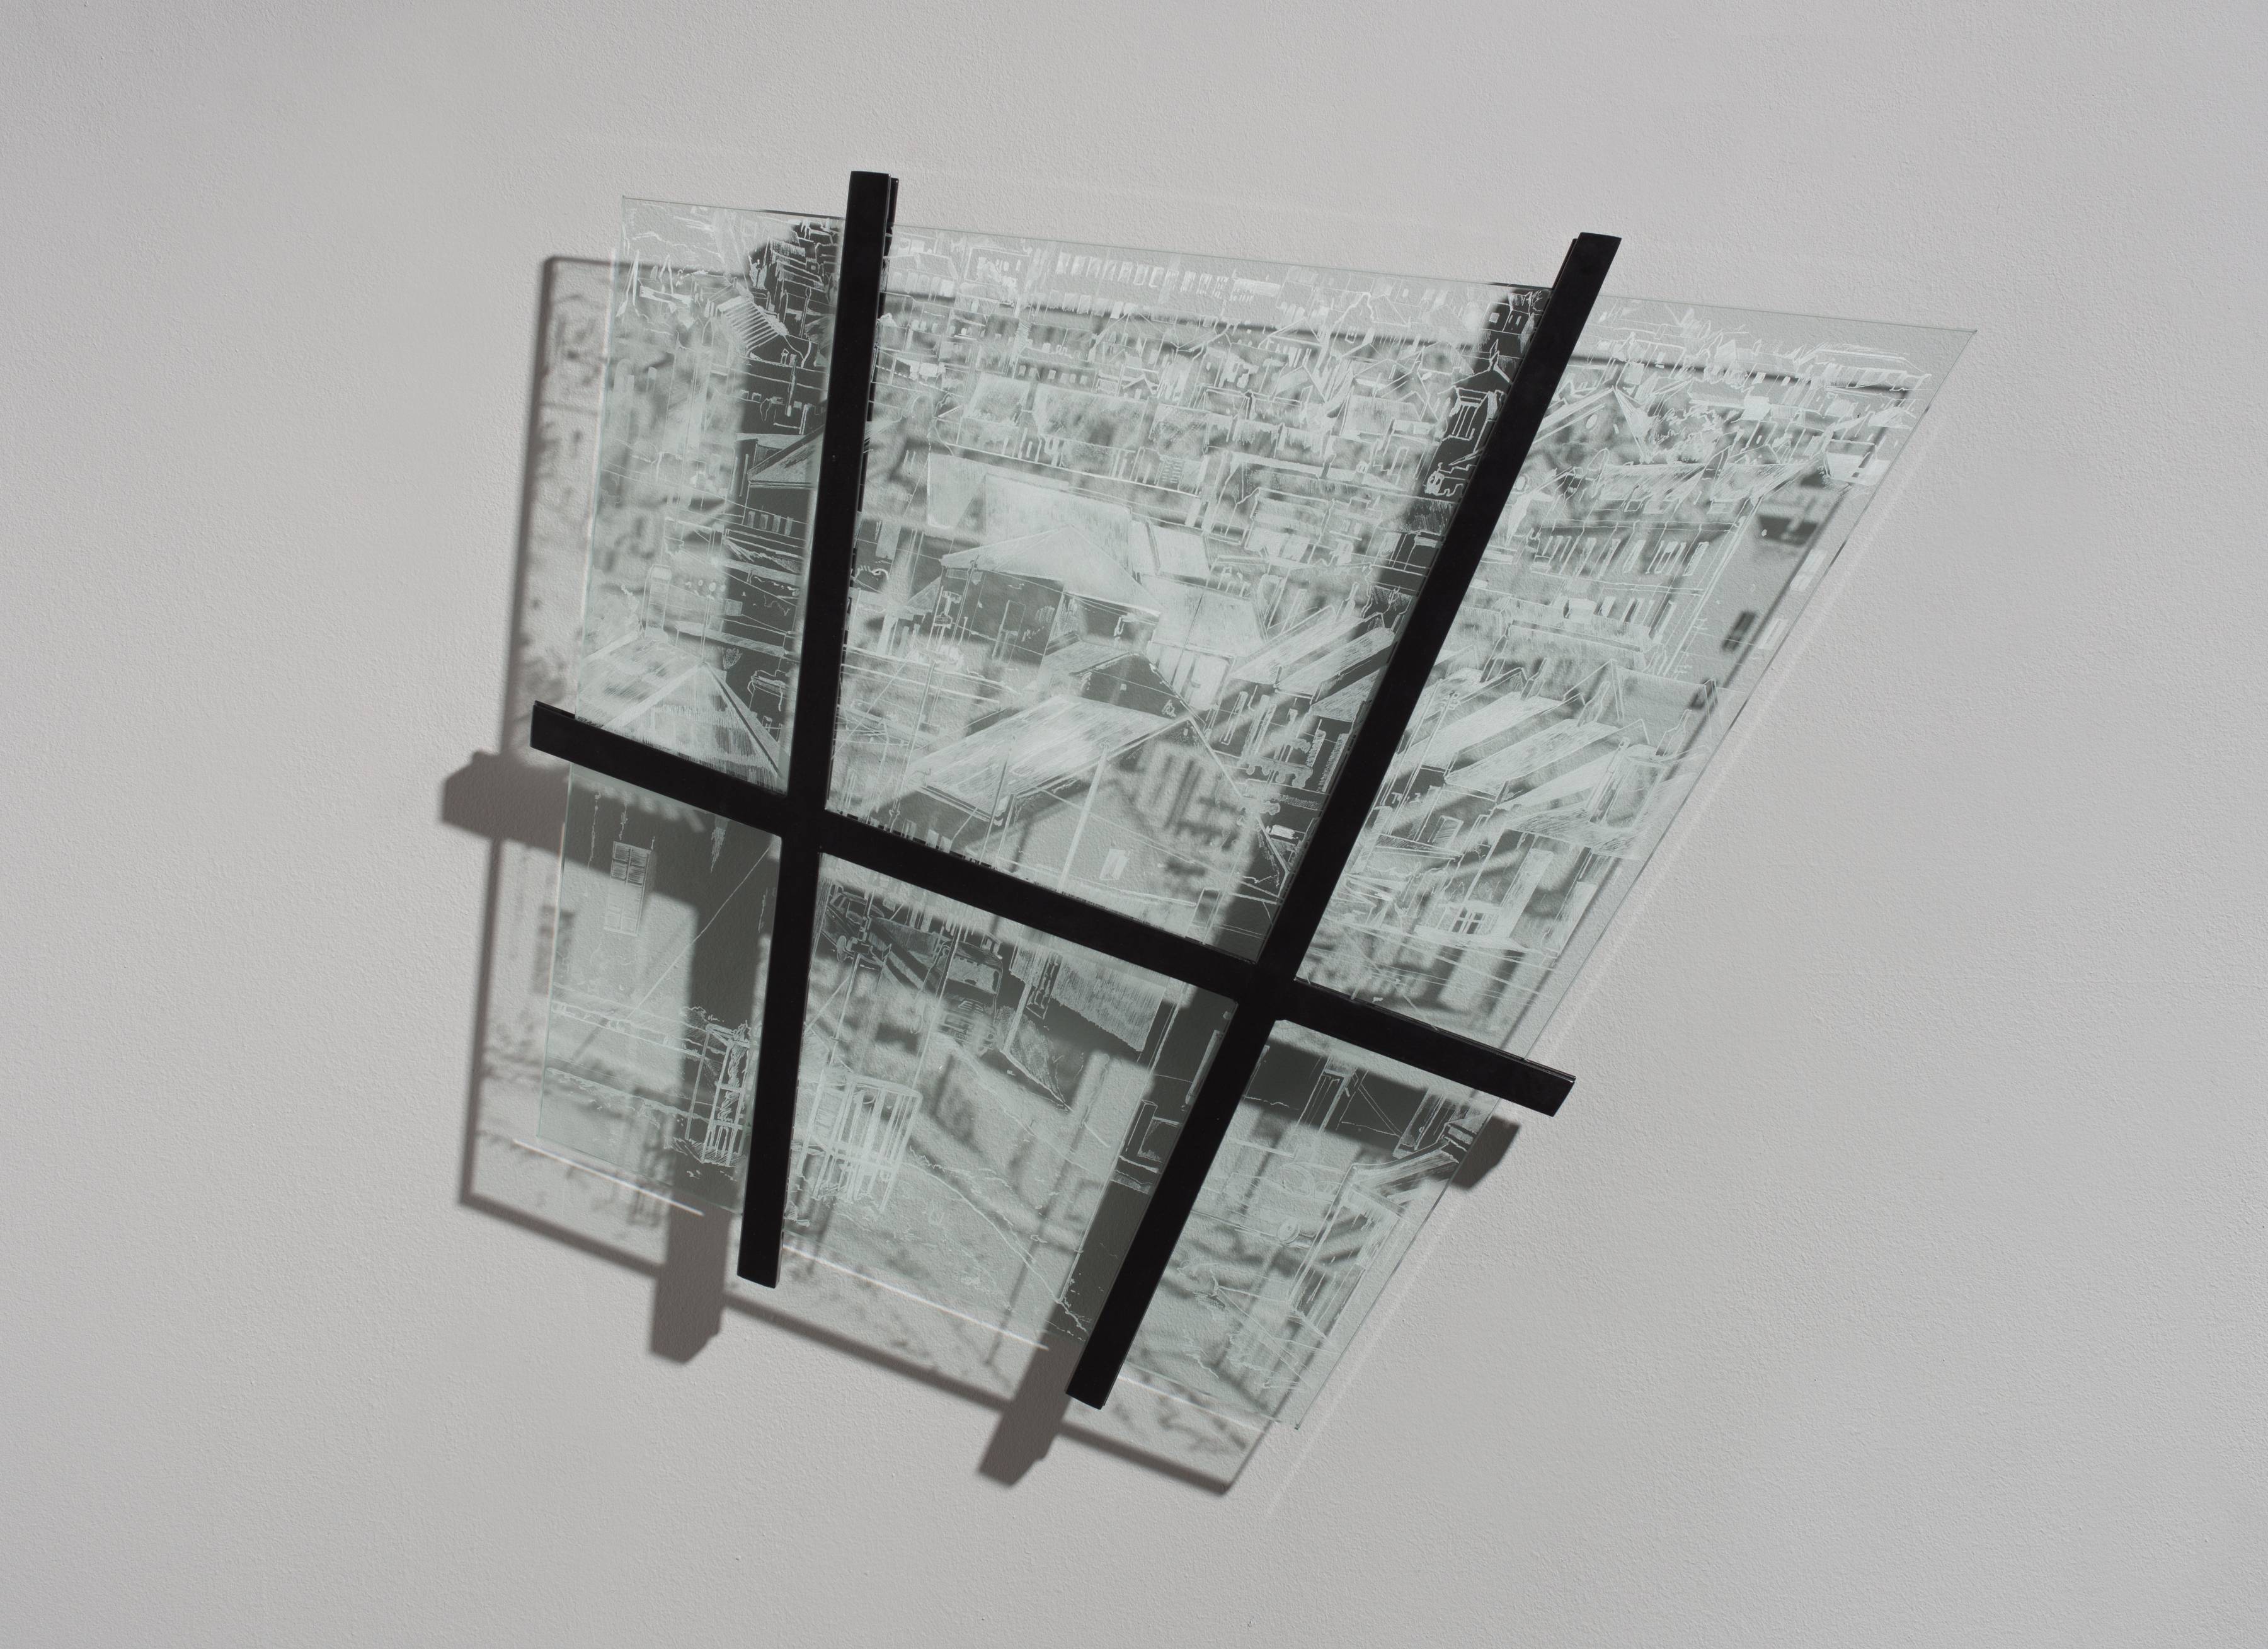 The Lost District: The Corner of Roger and Lee Streets

2019

Hand engraved glass and steel frame

Work: 81 x 76.5 cm

Sales enquiries